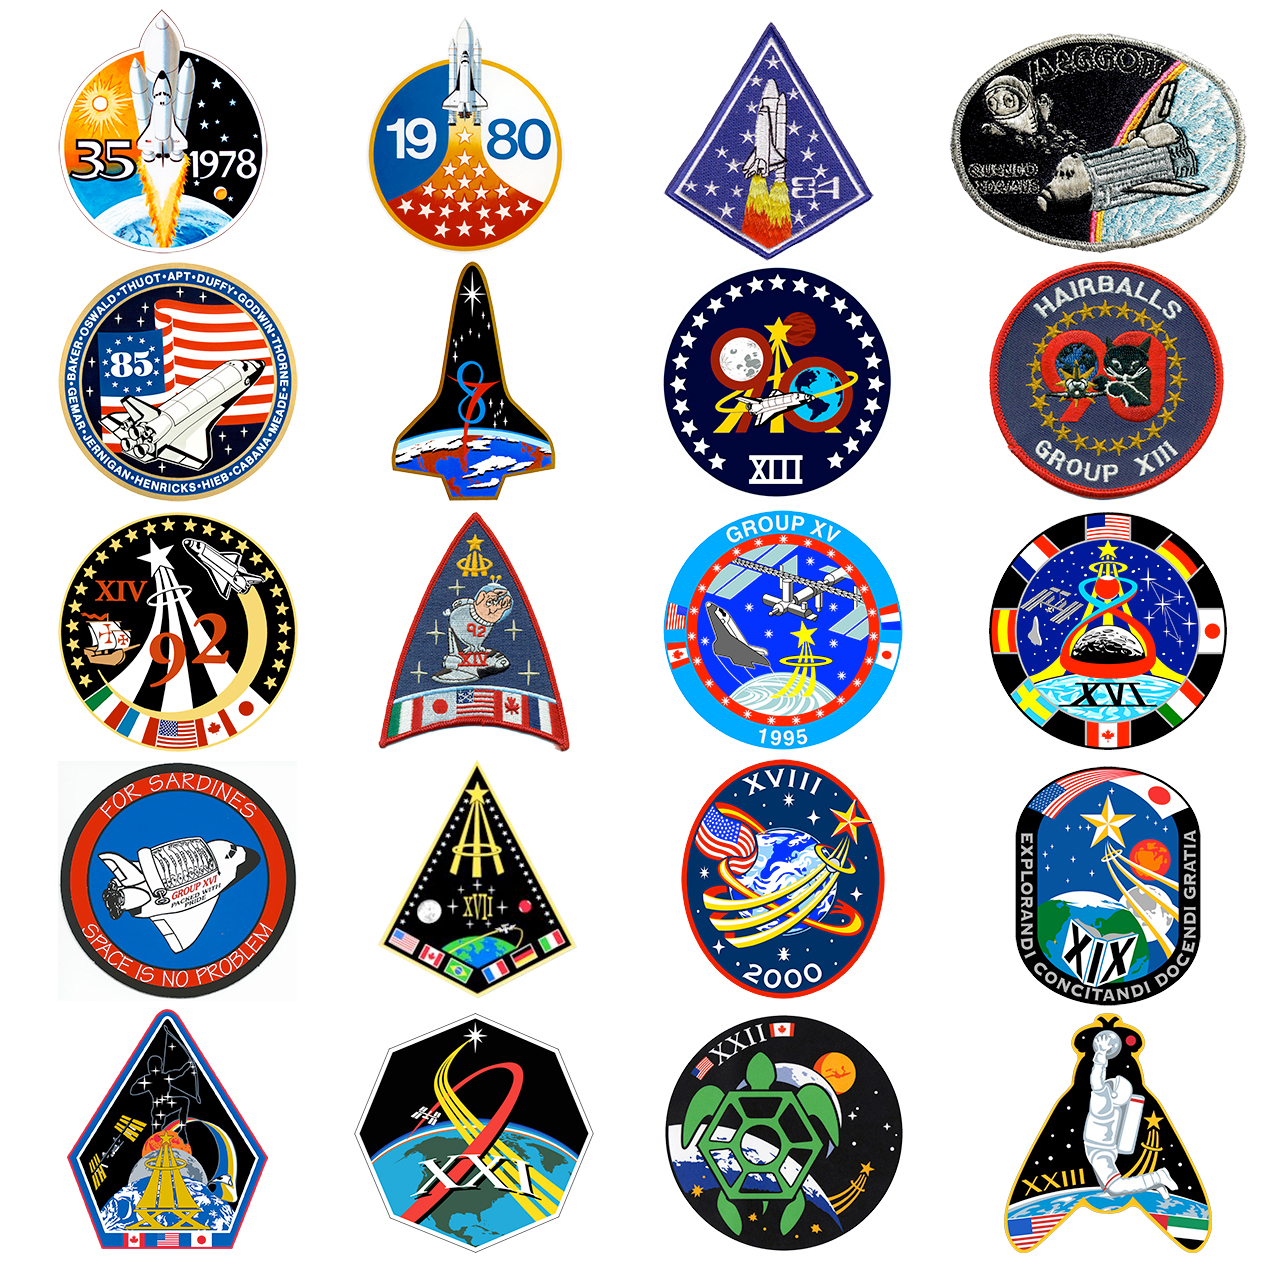 NASA astronaut class patches, from Group 8 (1978) through Group 23 (2022), including nickname patches.